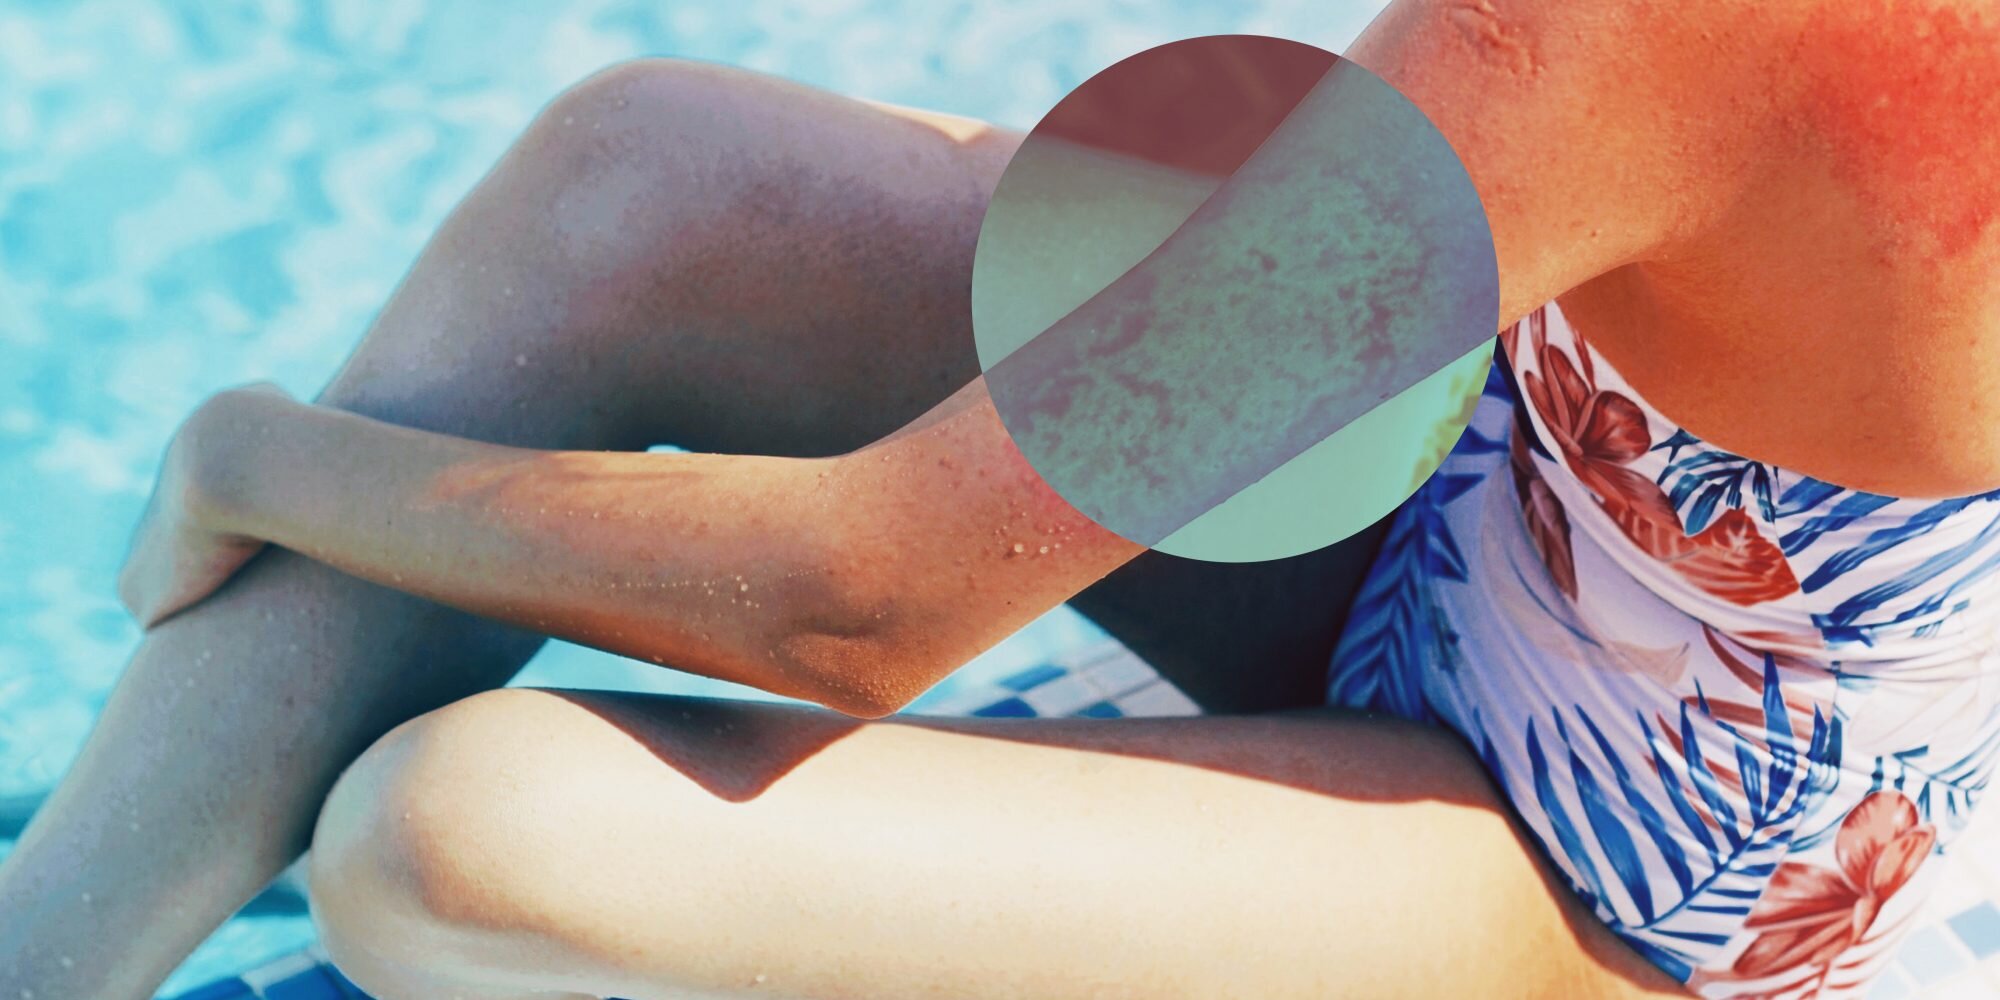 What Is a Chlorine Rash? Experts Explain Why Your Skin Might Feel Itchy After Swimming in a Pool